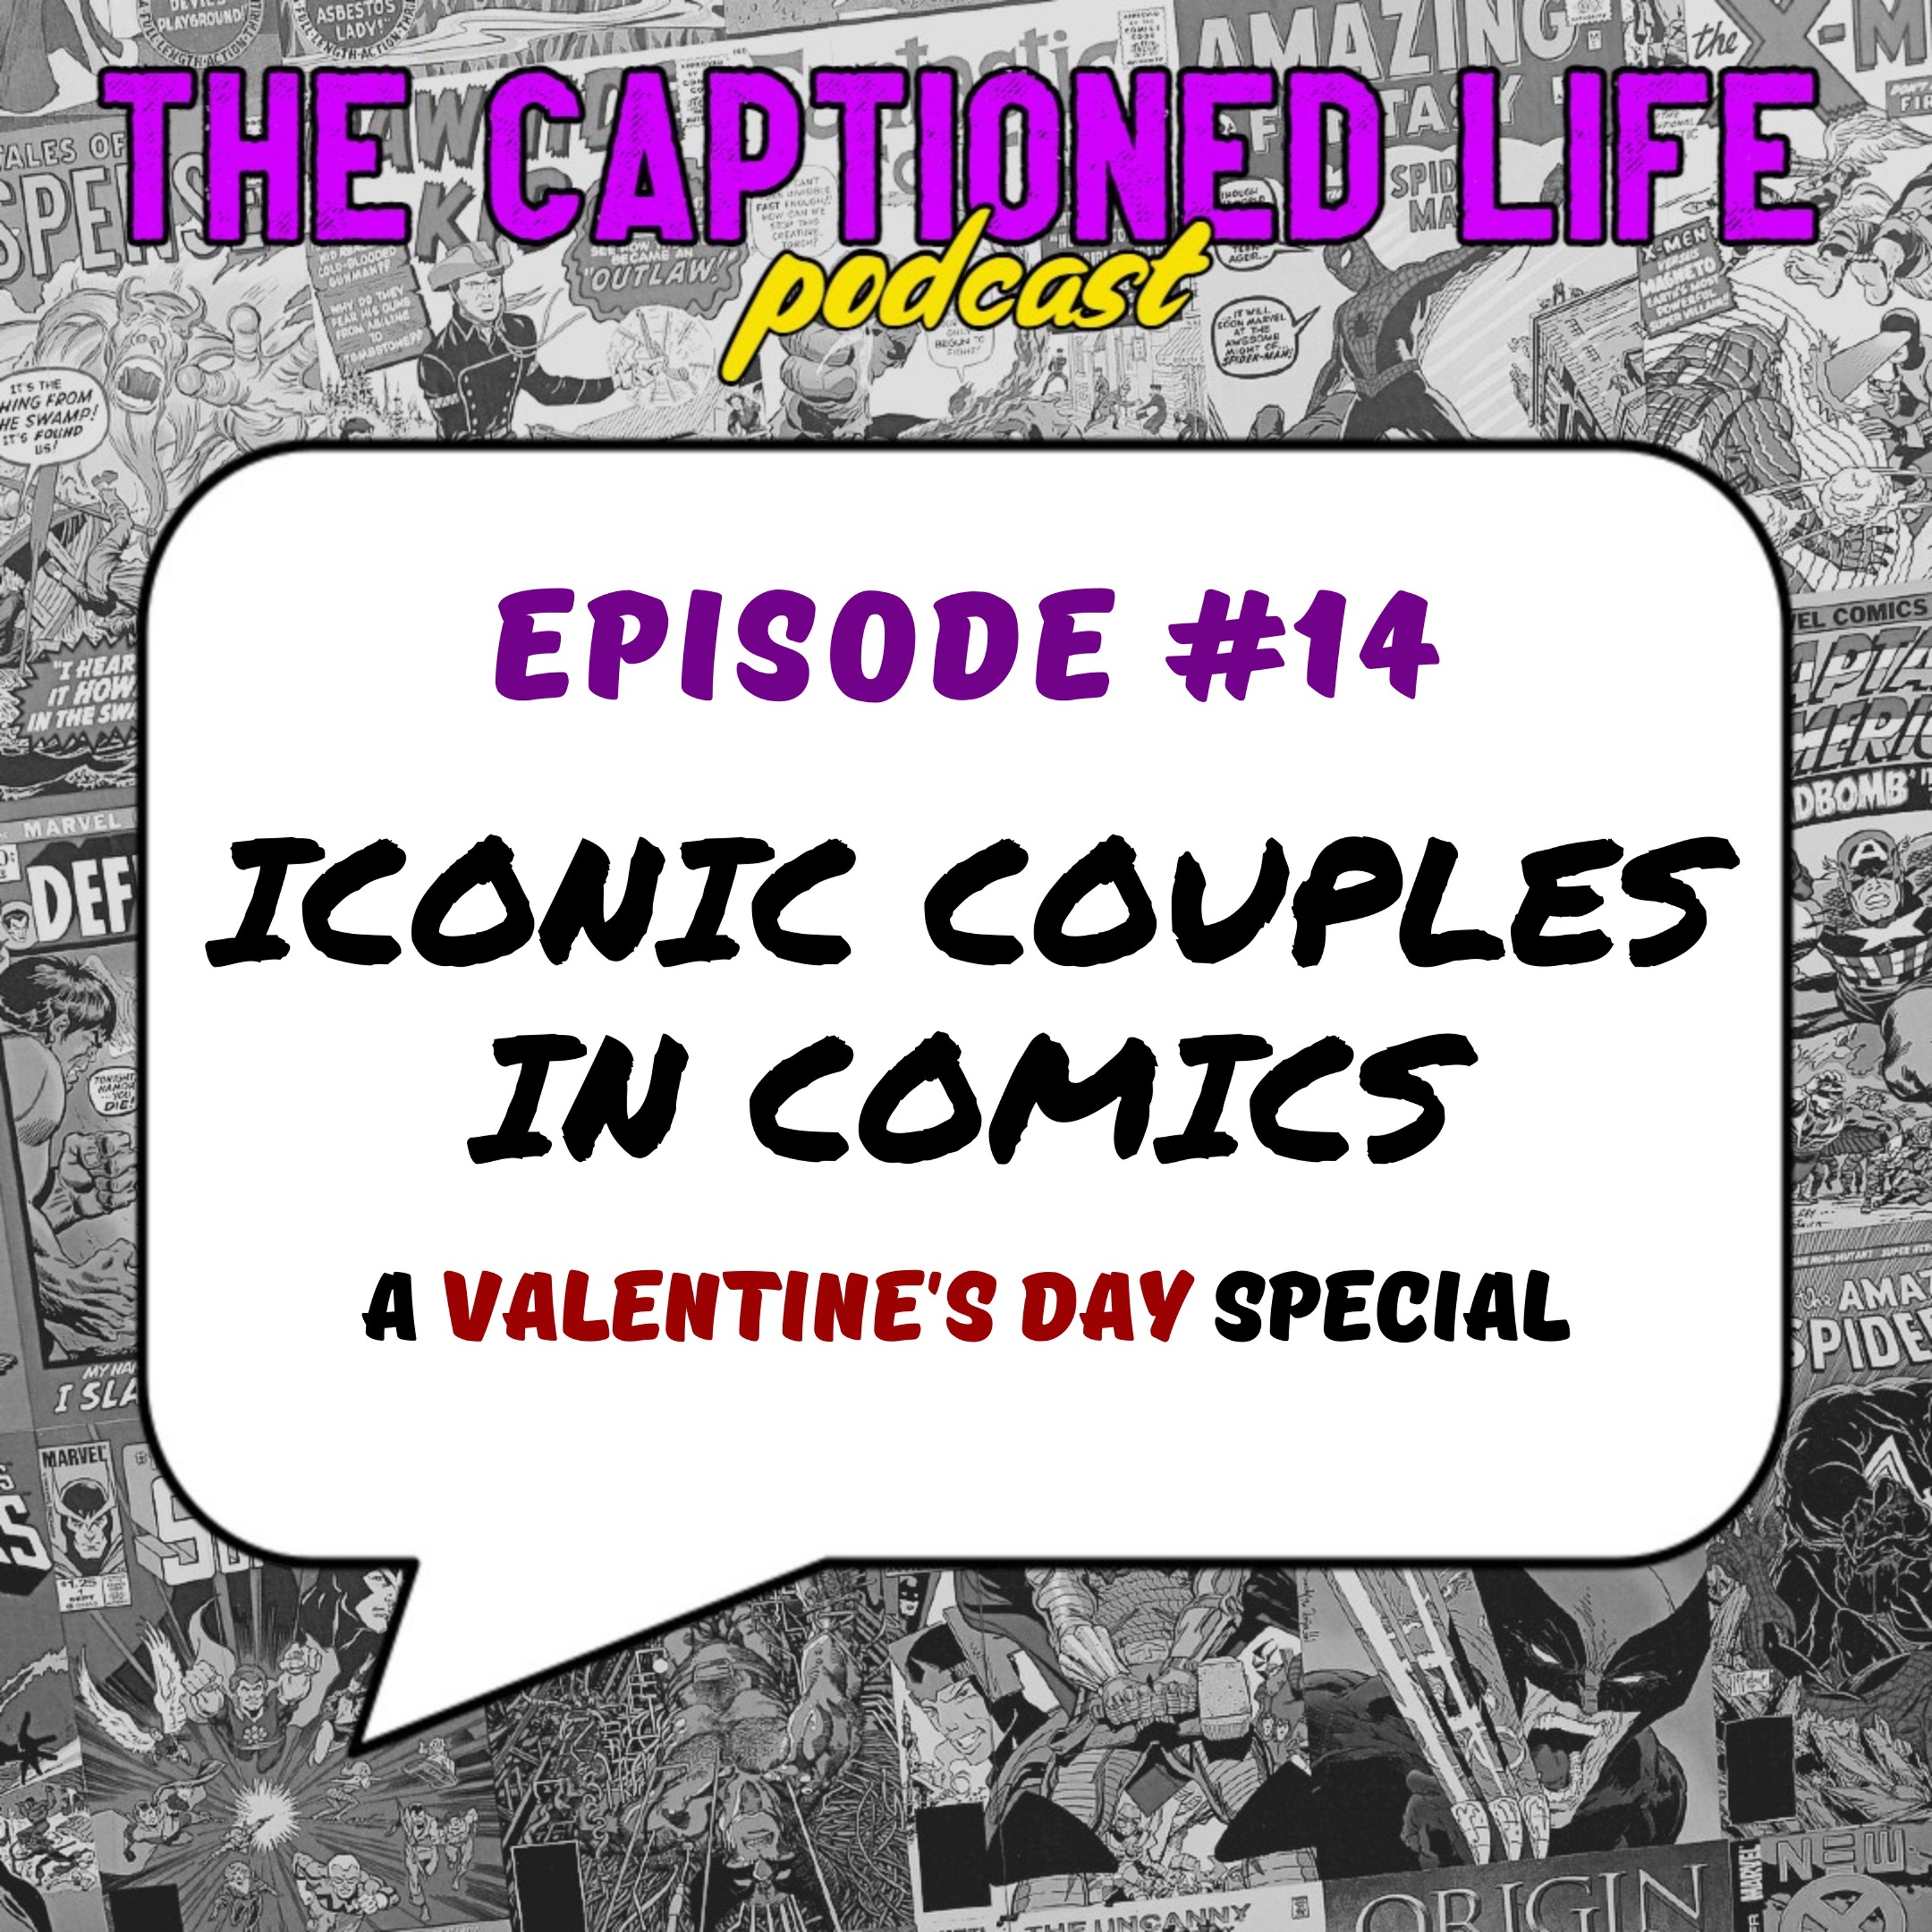 #14 Iconic Couples In Comics: A Valentines Day Special